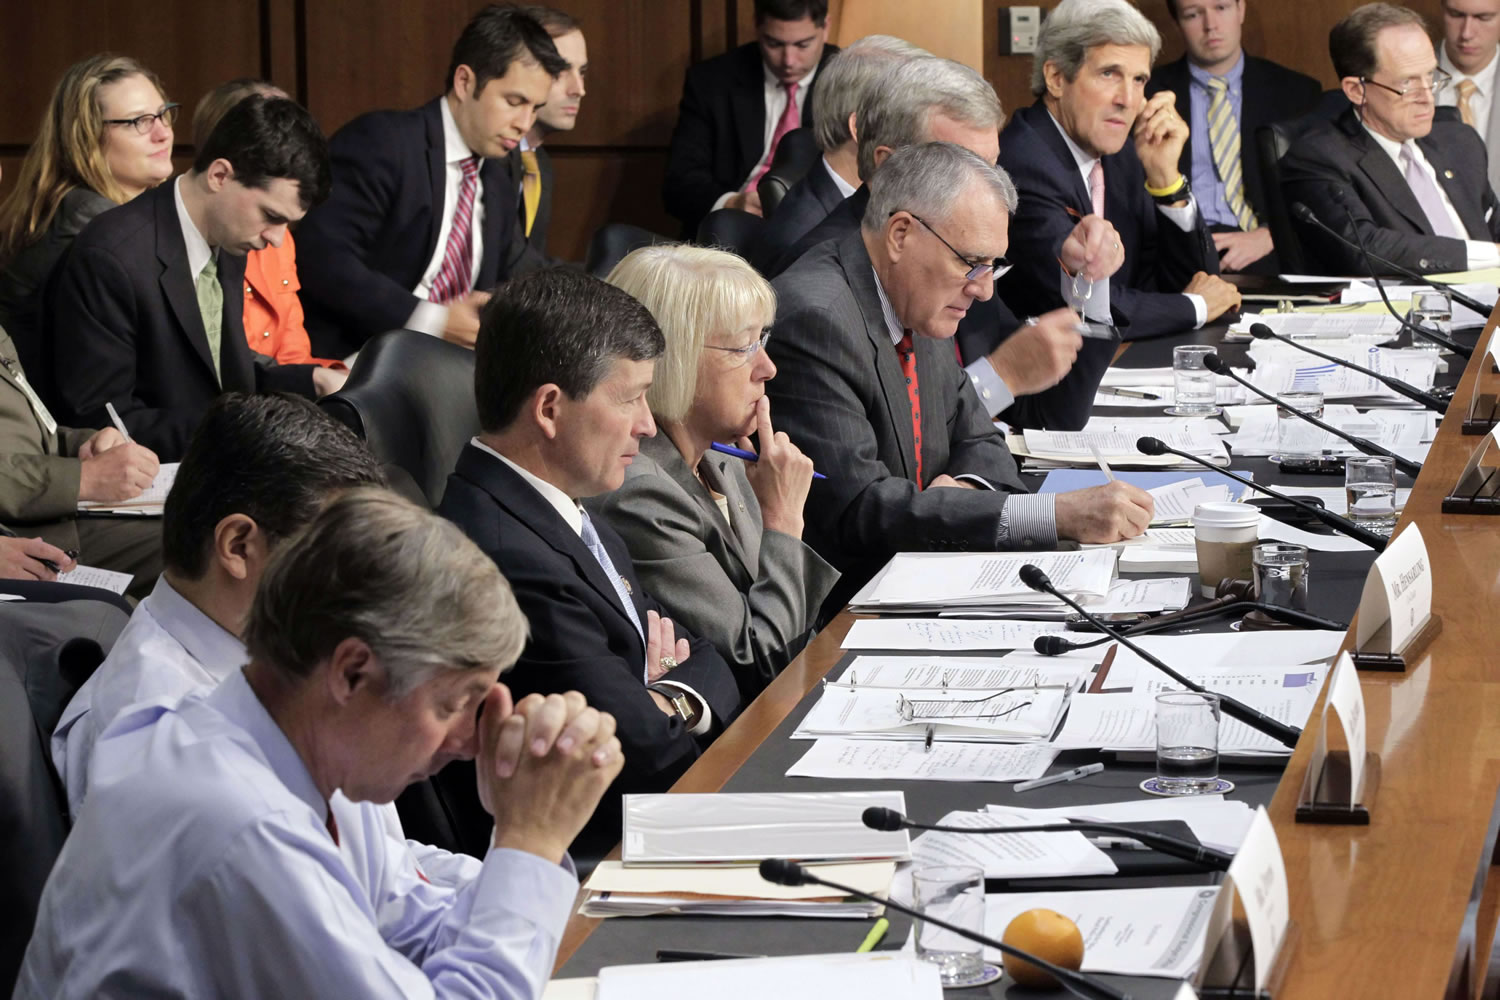 In this Sept. 13, 2011, file photo, the Joint Select Committee on Deficit Reduction, led by co-chairs Rep. Jeb Hensarling, R-Texas, third from left, and Sen. Patty Murray, D-Wash., fourth from left, meets on Capitol Hill in Washington to hear testimony about the national debt from the Congressional budget director. After weeks of secret meetings the supercommittee seems no closer to reaching its assigned goal of at least $1.2 trillion in deficit savings over the next 10 years than it was when talks began.